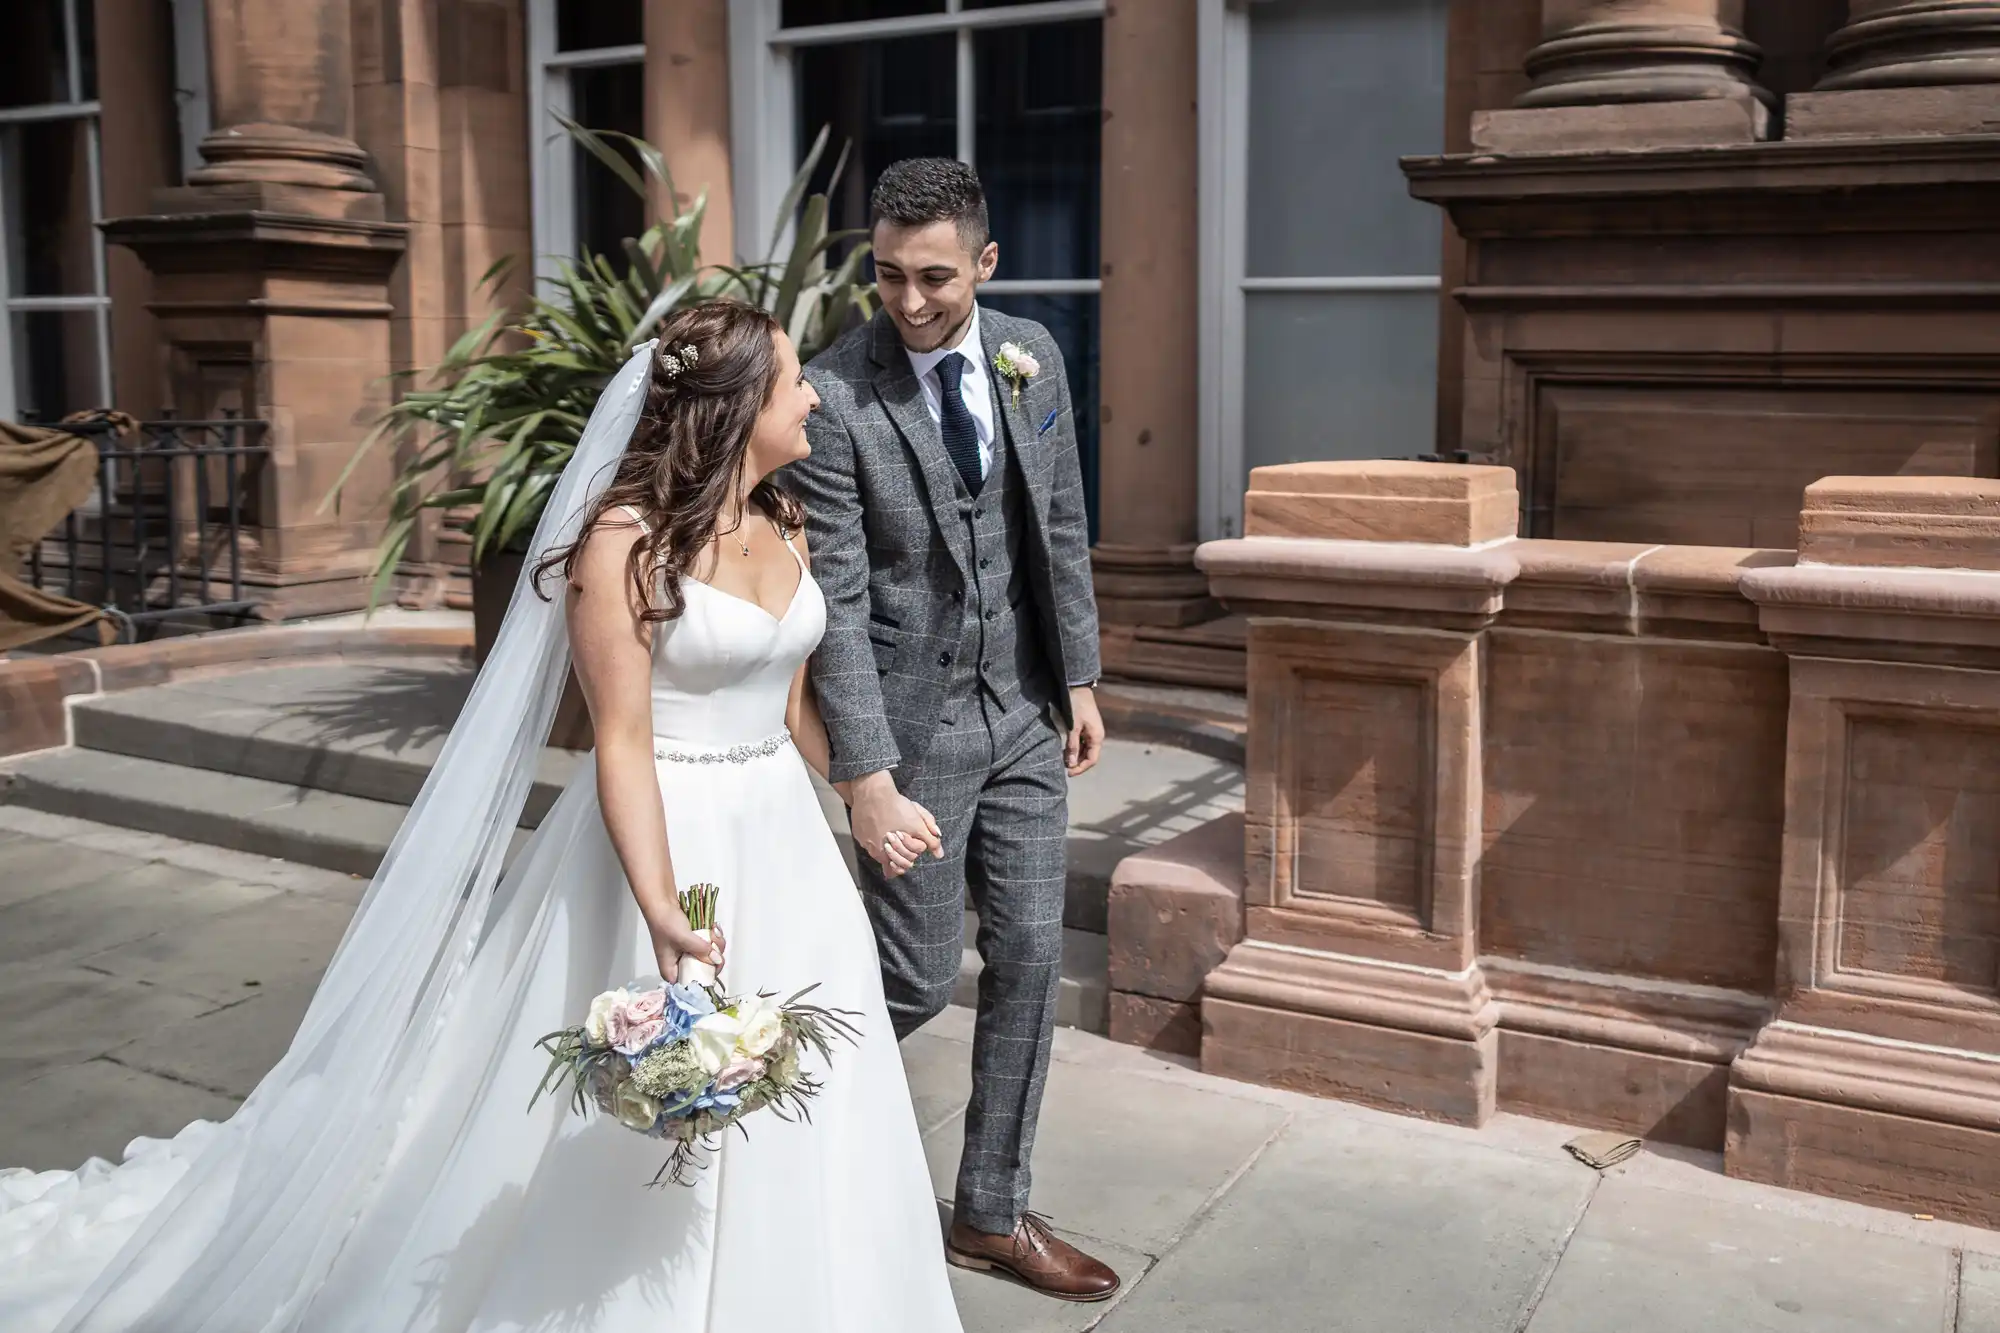 A bride in a white dress and a groom in a gray suit smiling at each other while walking next to a sandstone building.